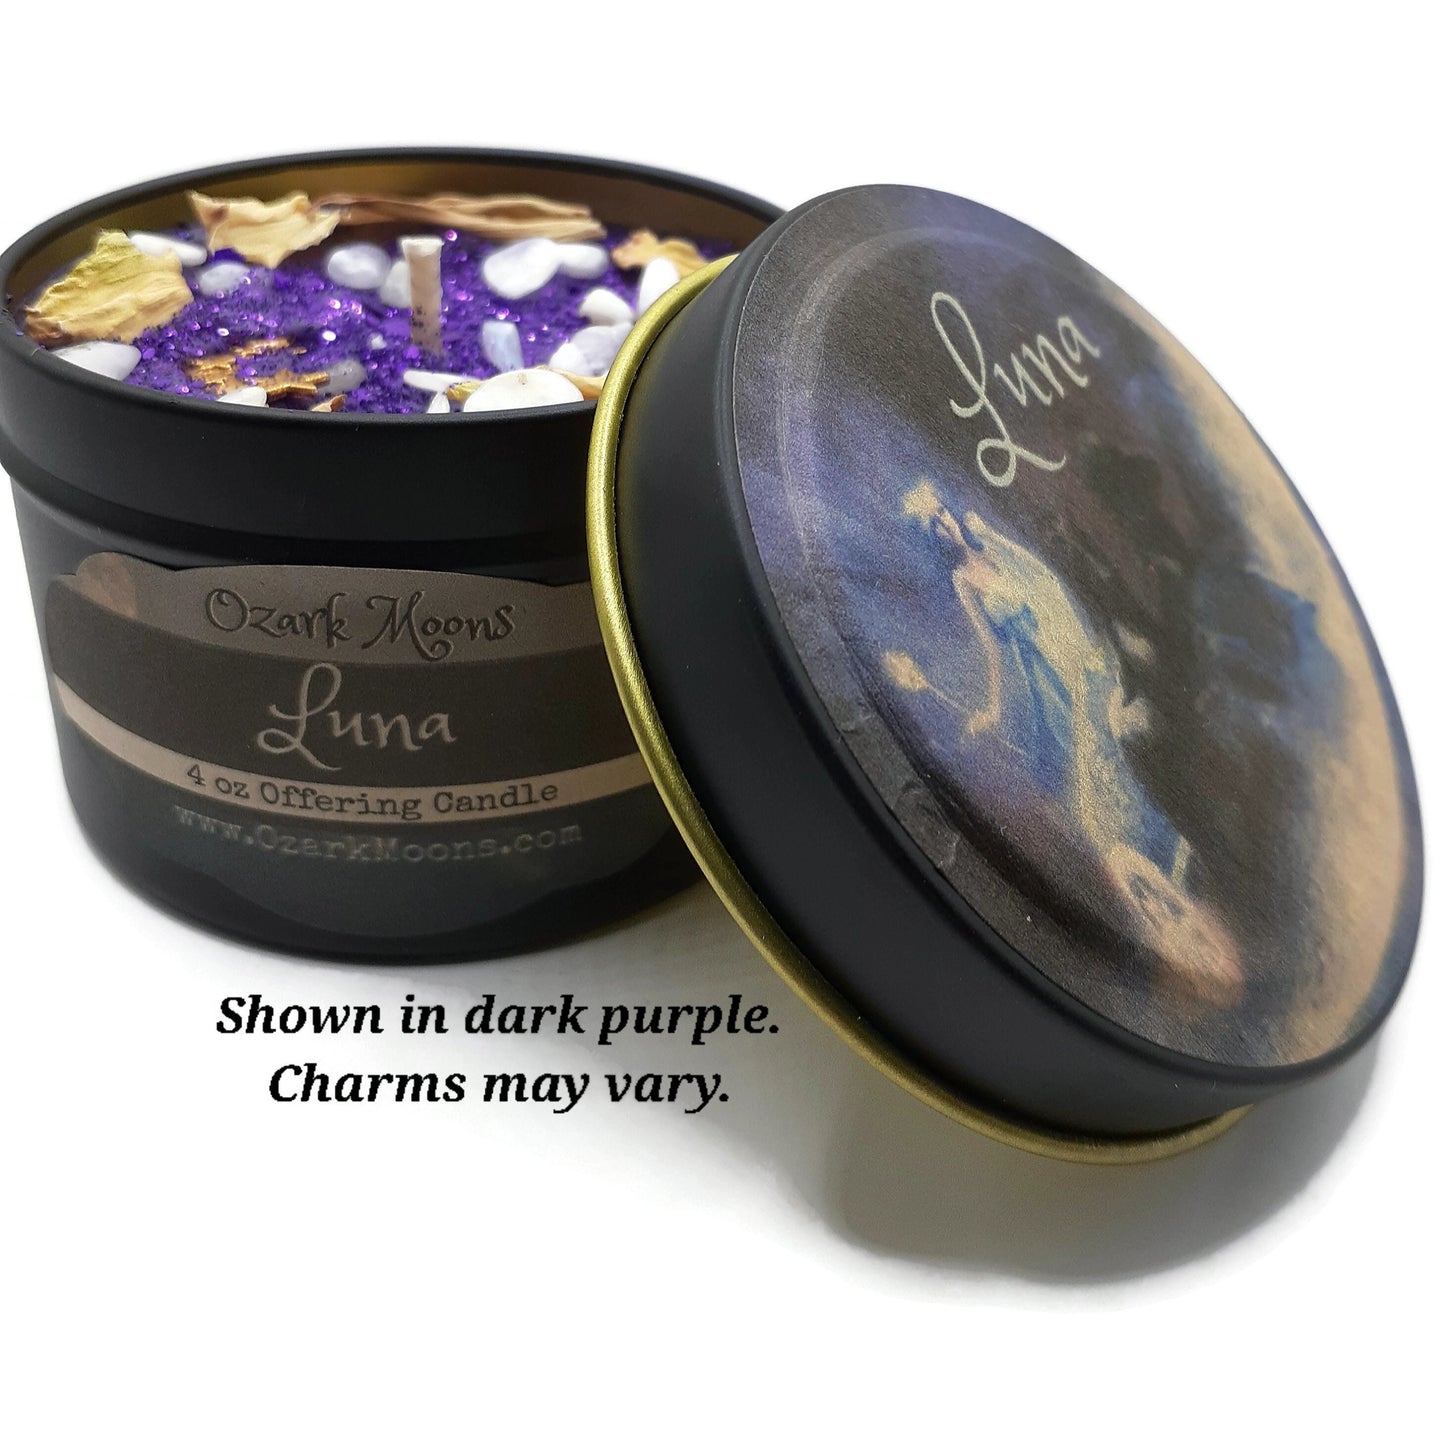 LUNA 4 oz Candle Roman Goddess of the Moon With Moonflowers and Moonstone - Pagan Wiccan Candles for Offering and Rituals Witch Witchy